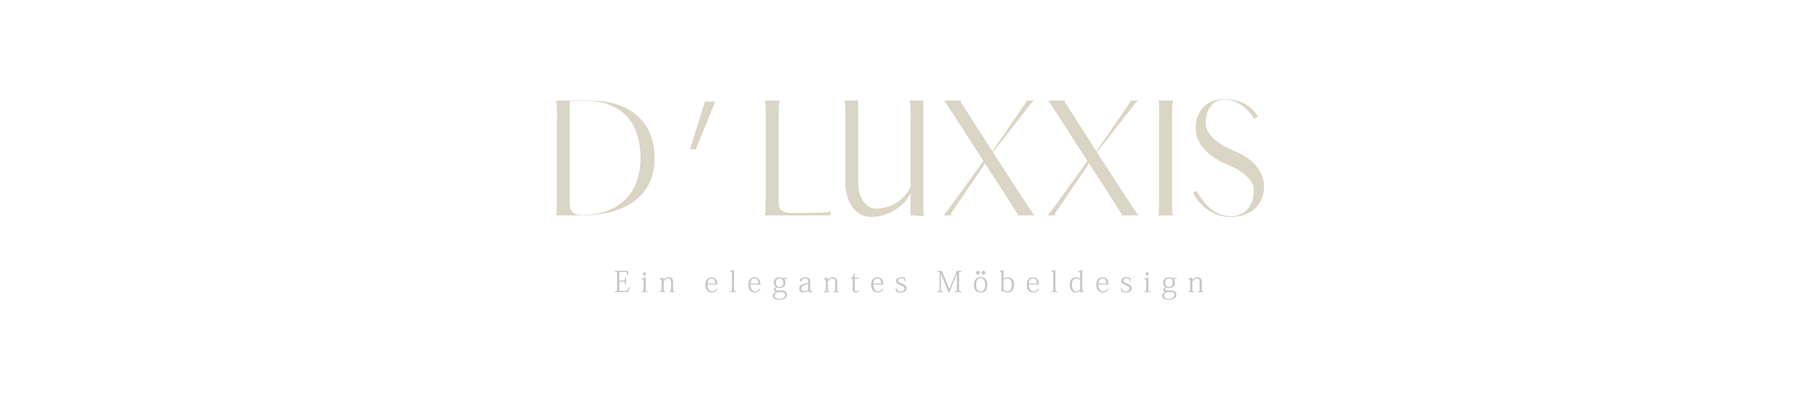 D'luxxis